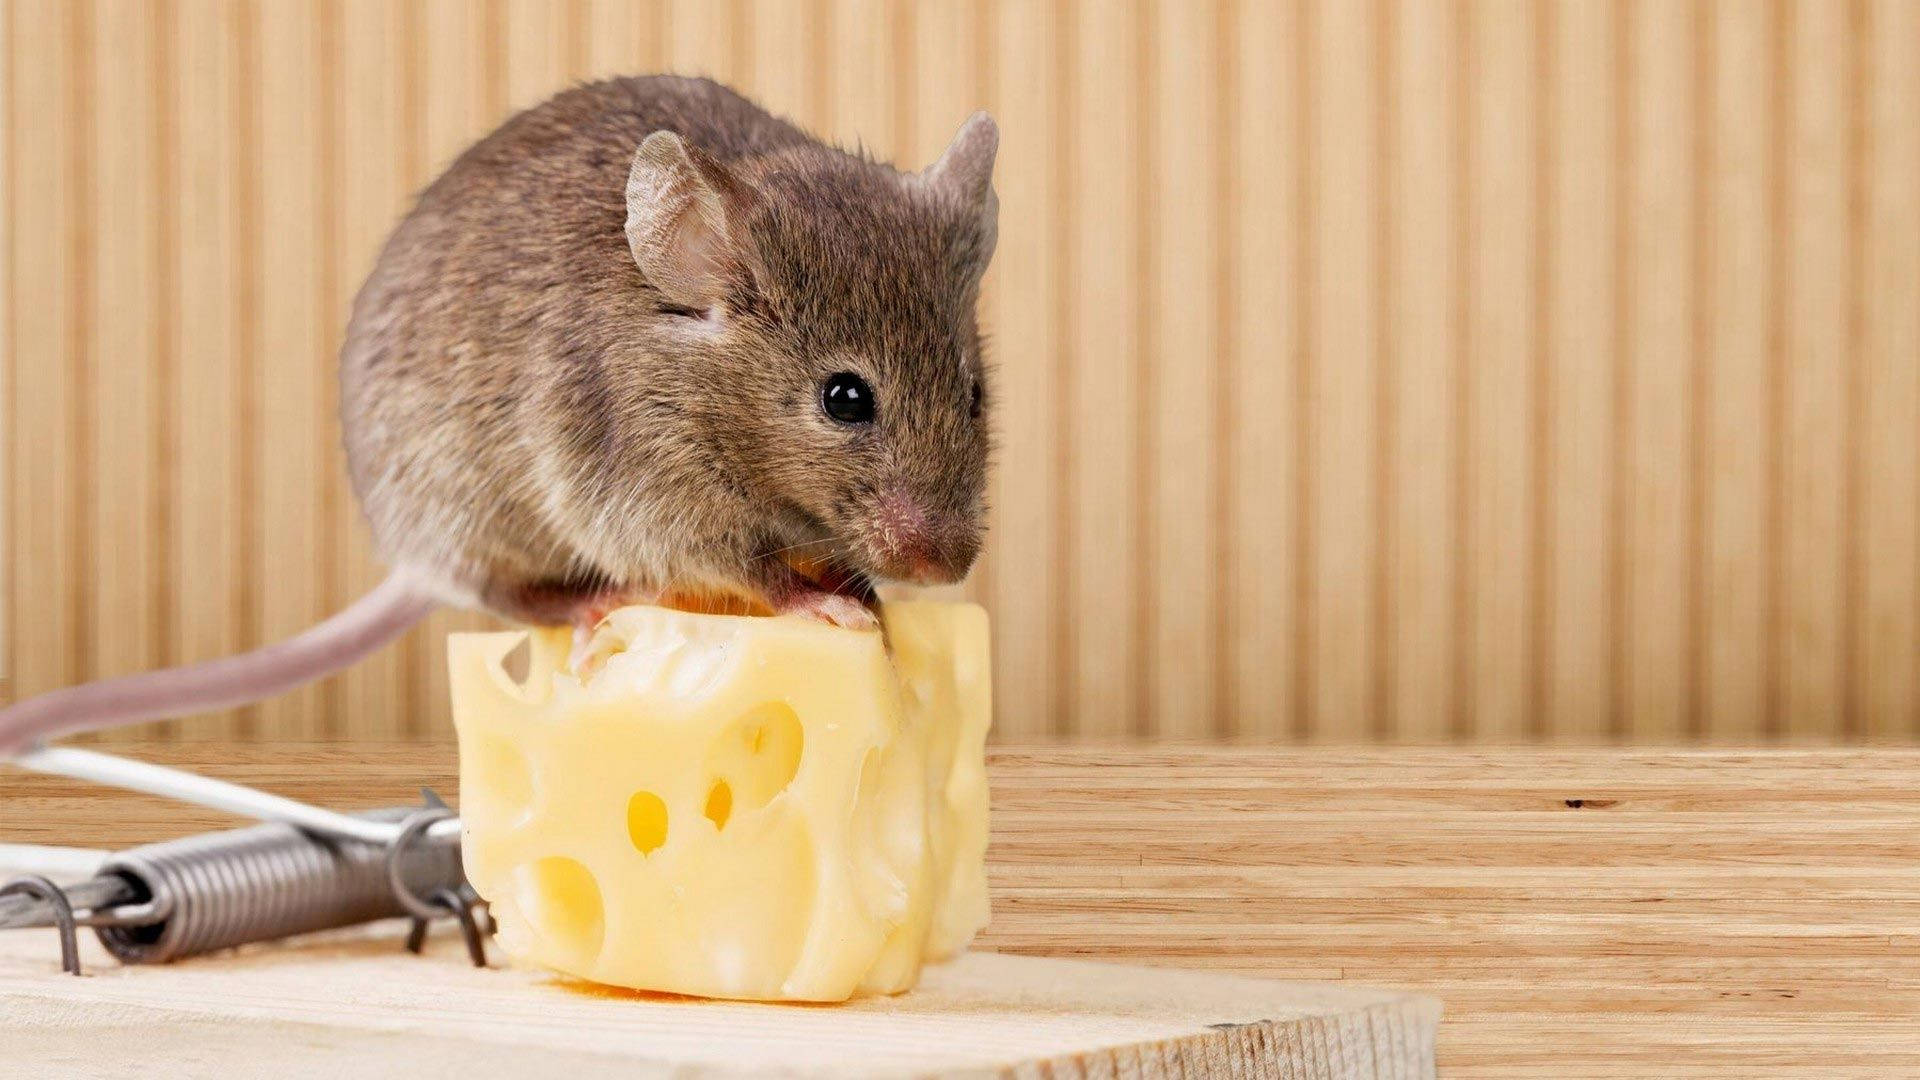 Baby Animal Mouse On Cheese